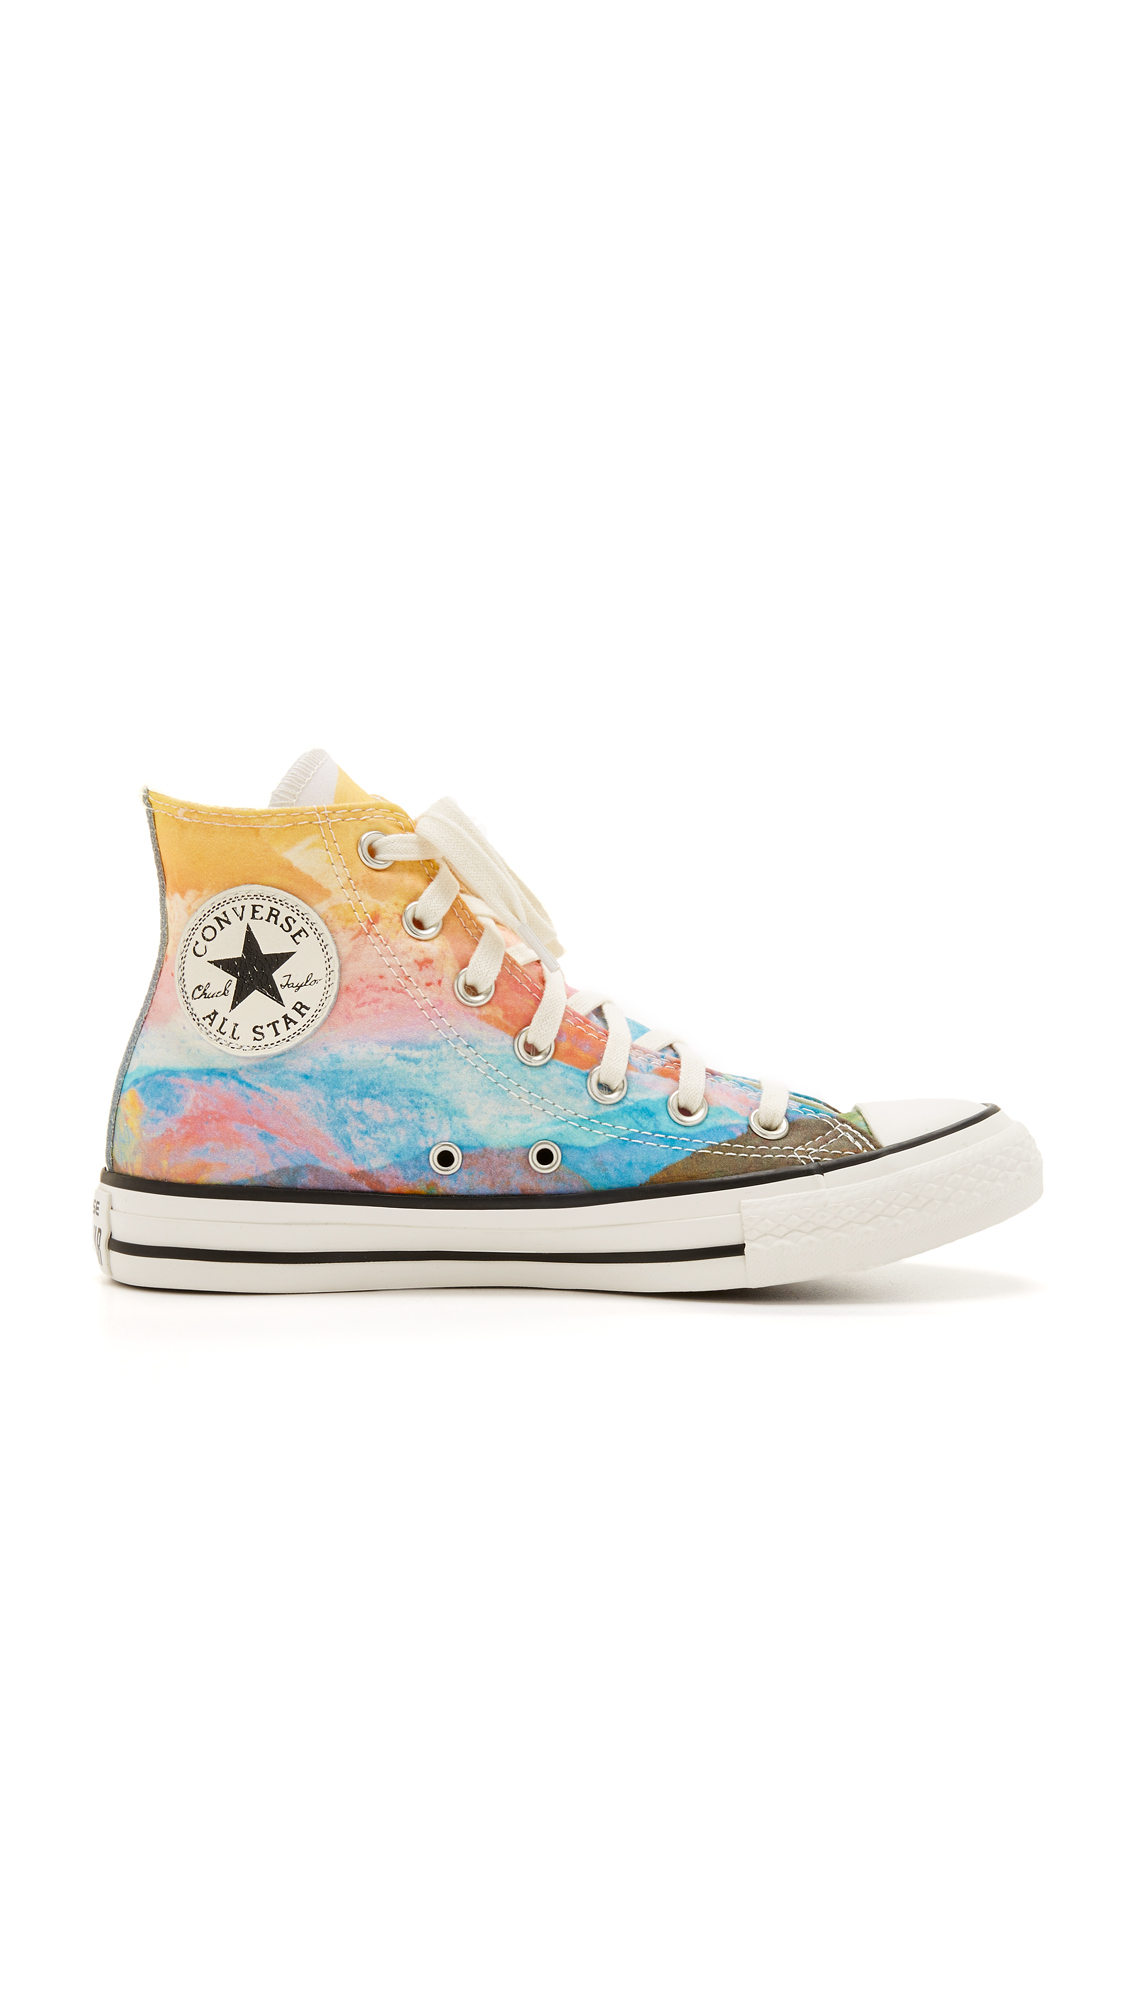 Converse Chuck Taylor All Star Photo Reel Sunset Sneakers in Orange - Lyst